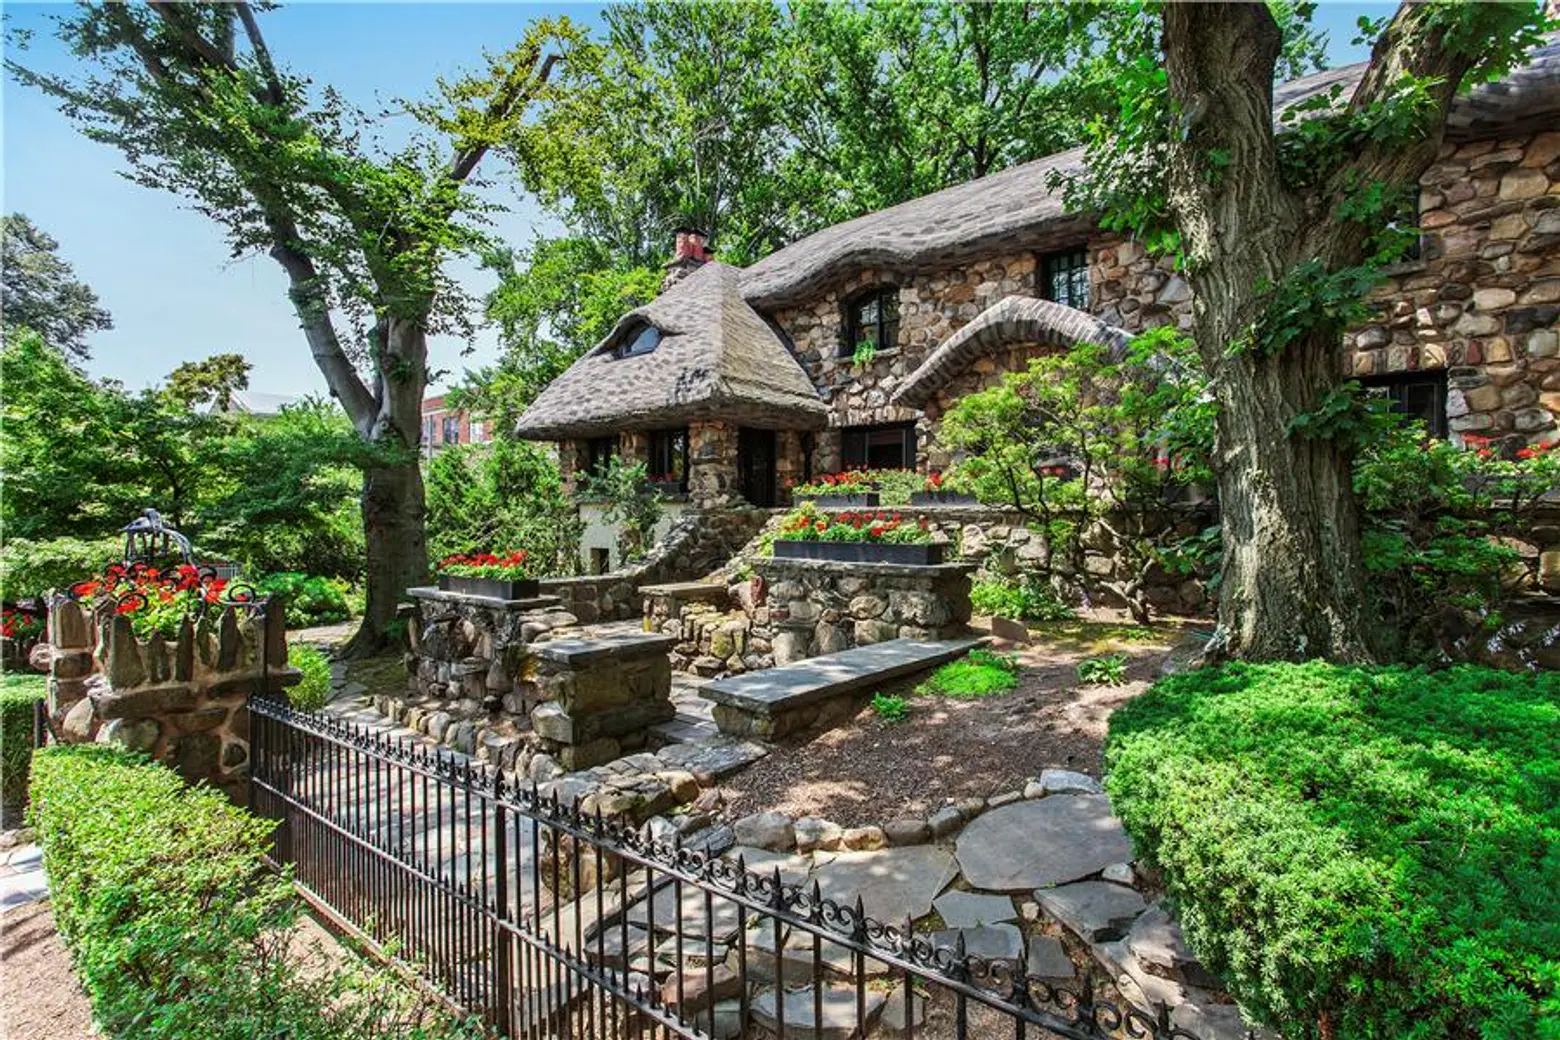 PHOTOS: New York's Famous 'Gingerbread House' Back on the Market